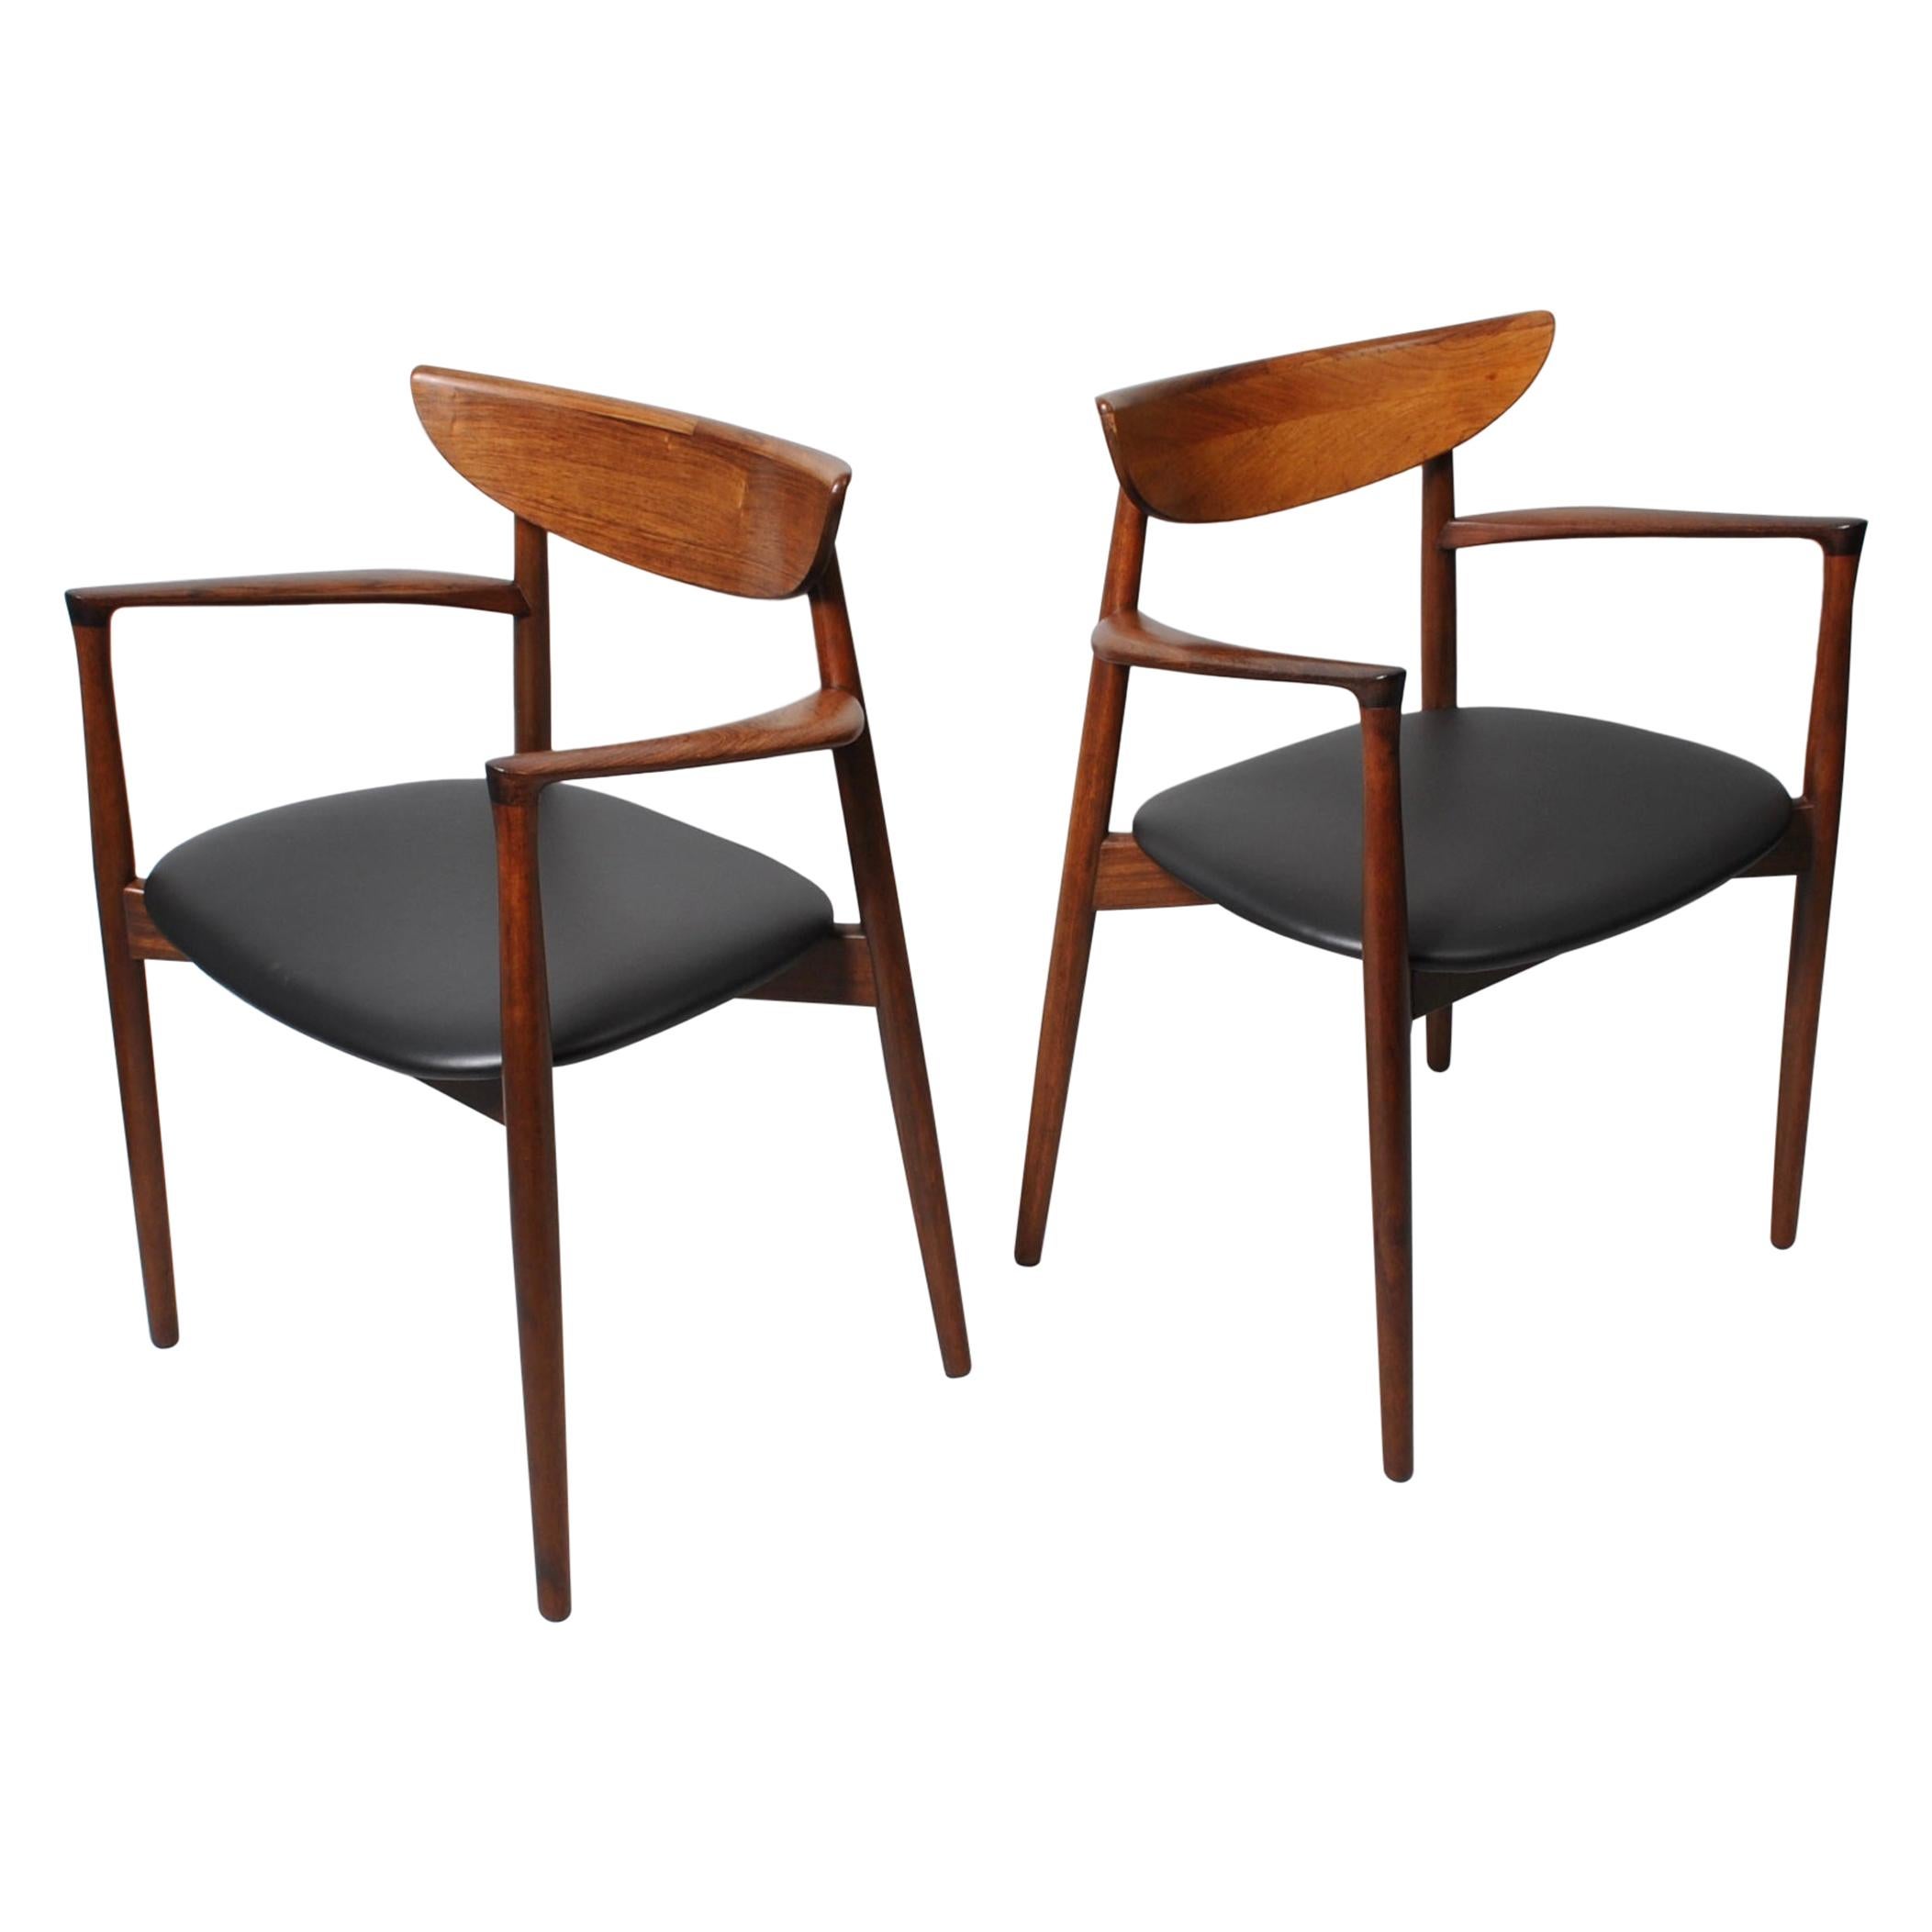 Harry Ostergaard, Pair of Midcentury Chairs